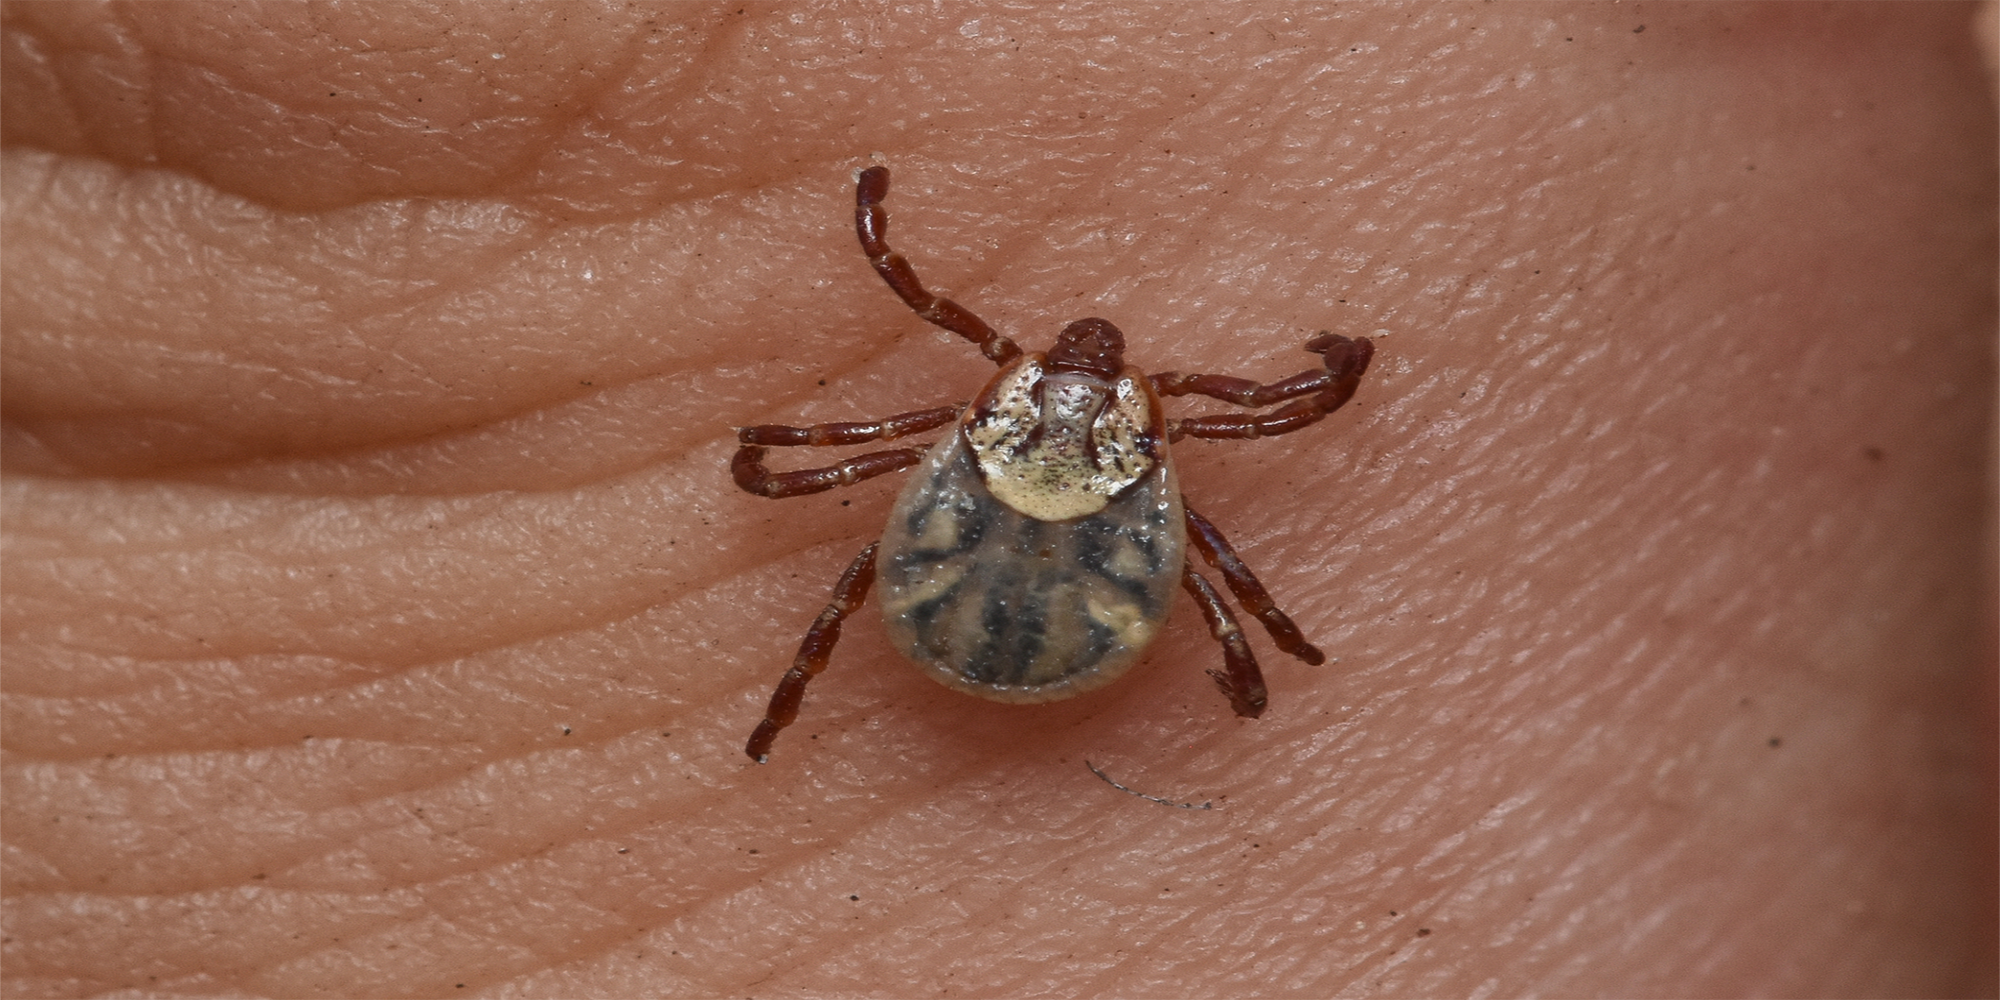 An American dog tick on someone's hand.